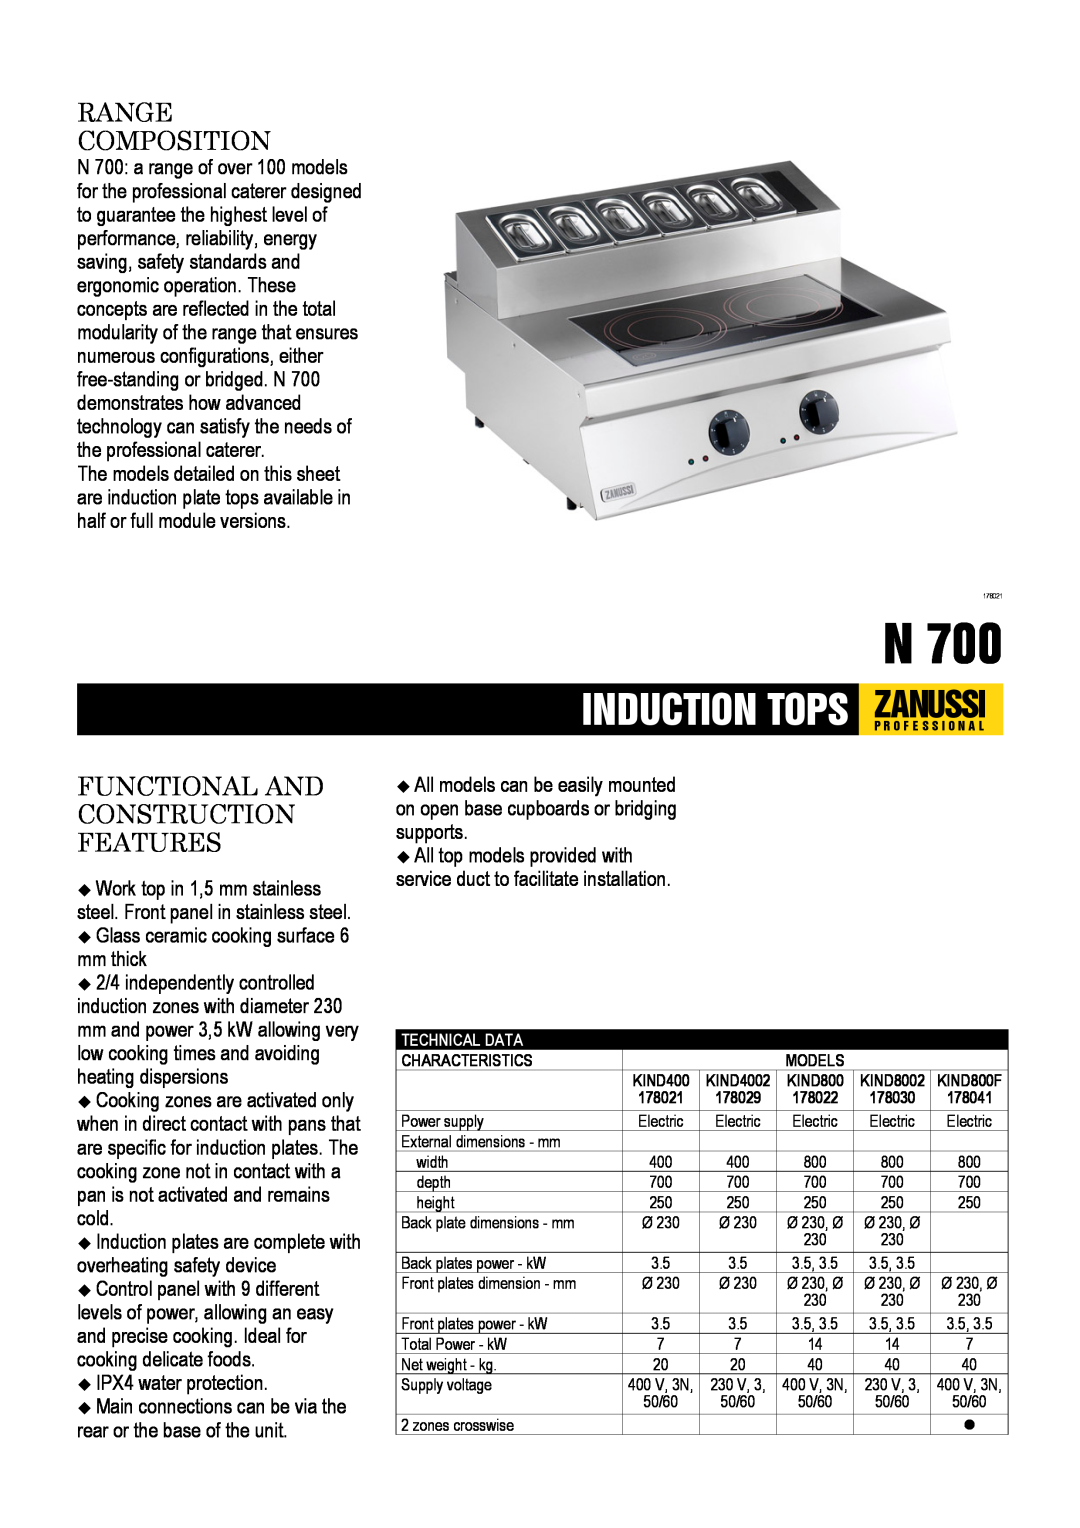 Zanussi KIND800F, KIND4002 dimensions Range Composition, Functional And Construction Features, IPX4 water protection 